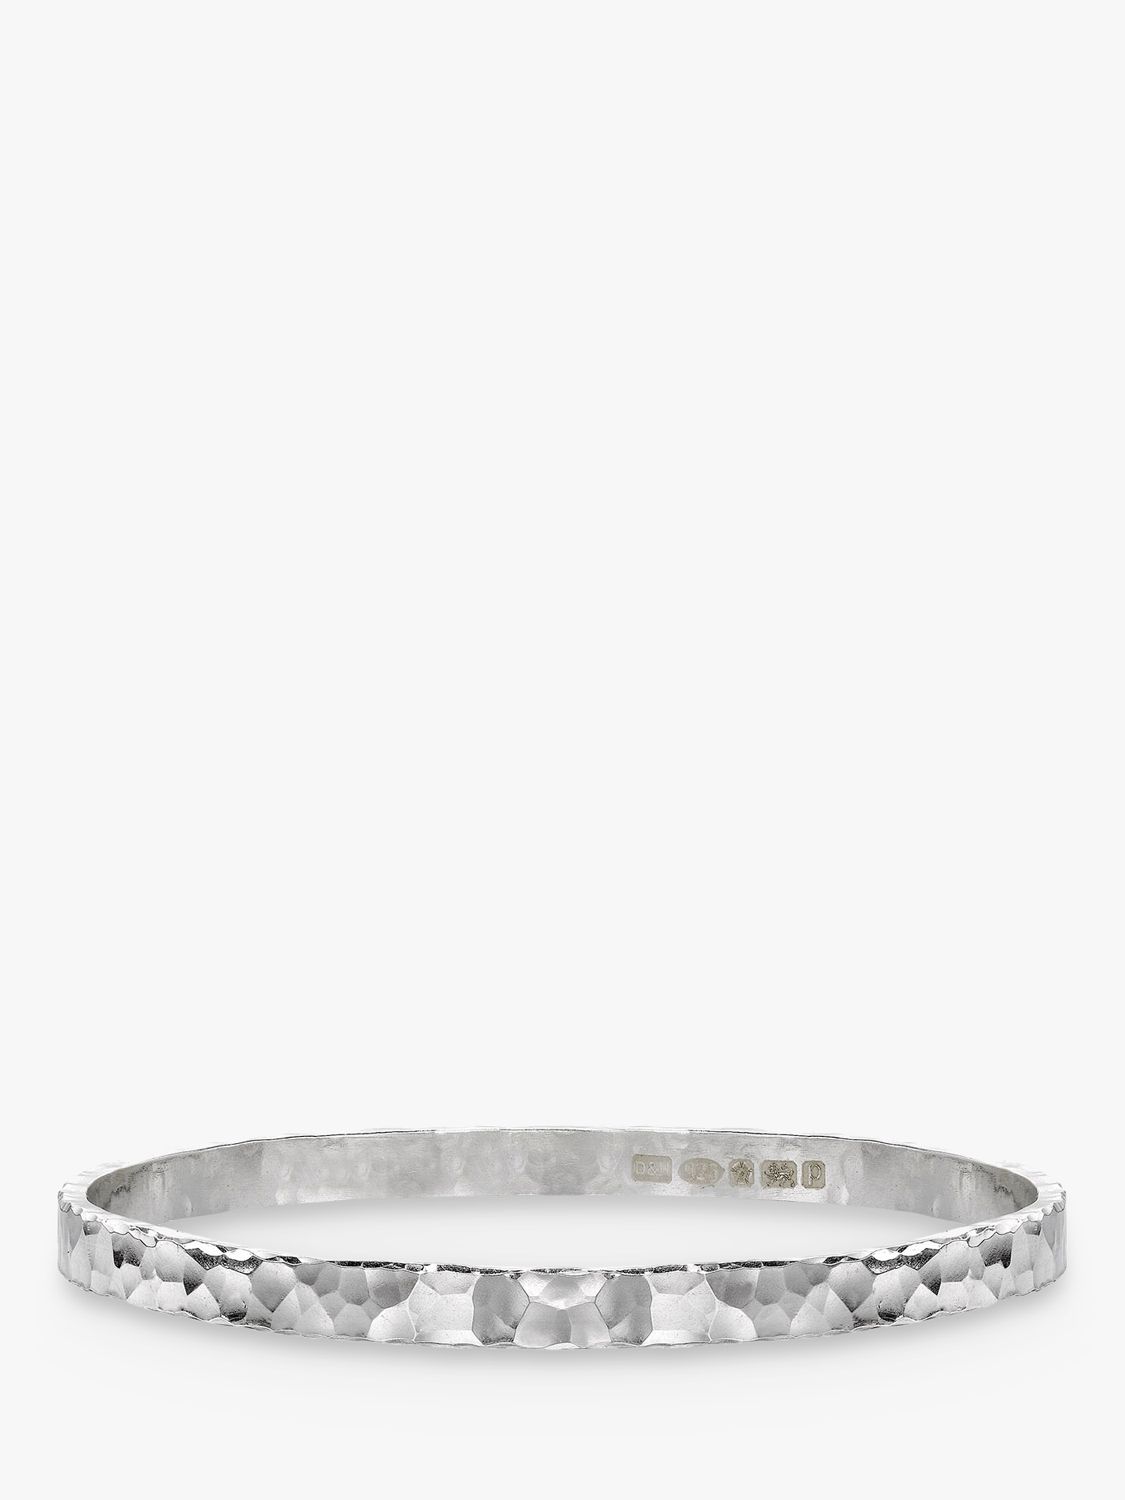 Dower & Hall Hammered Nomad Bangle, Silver